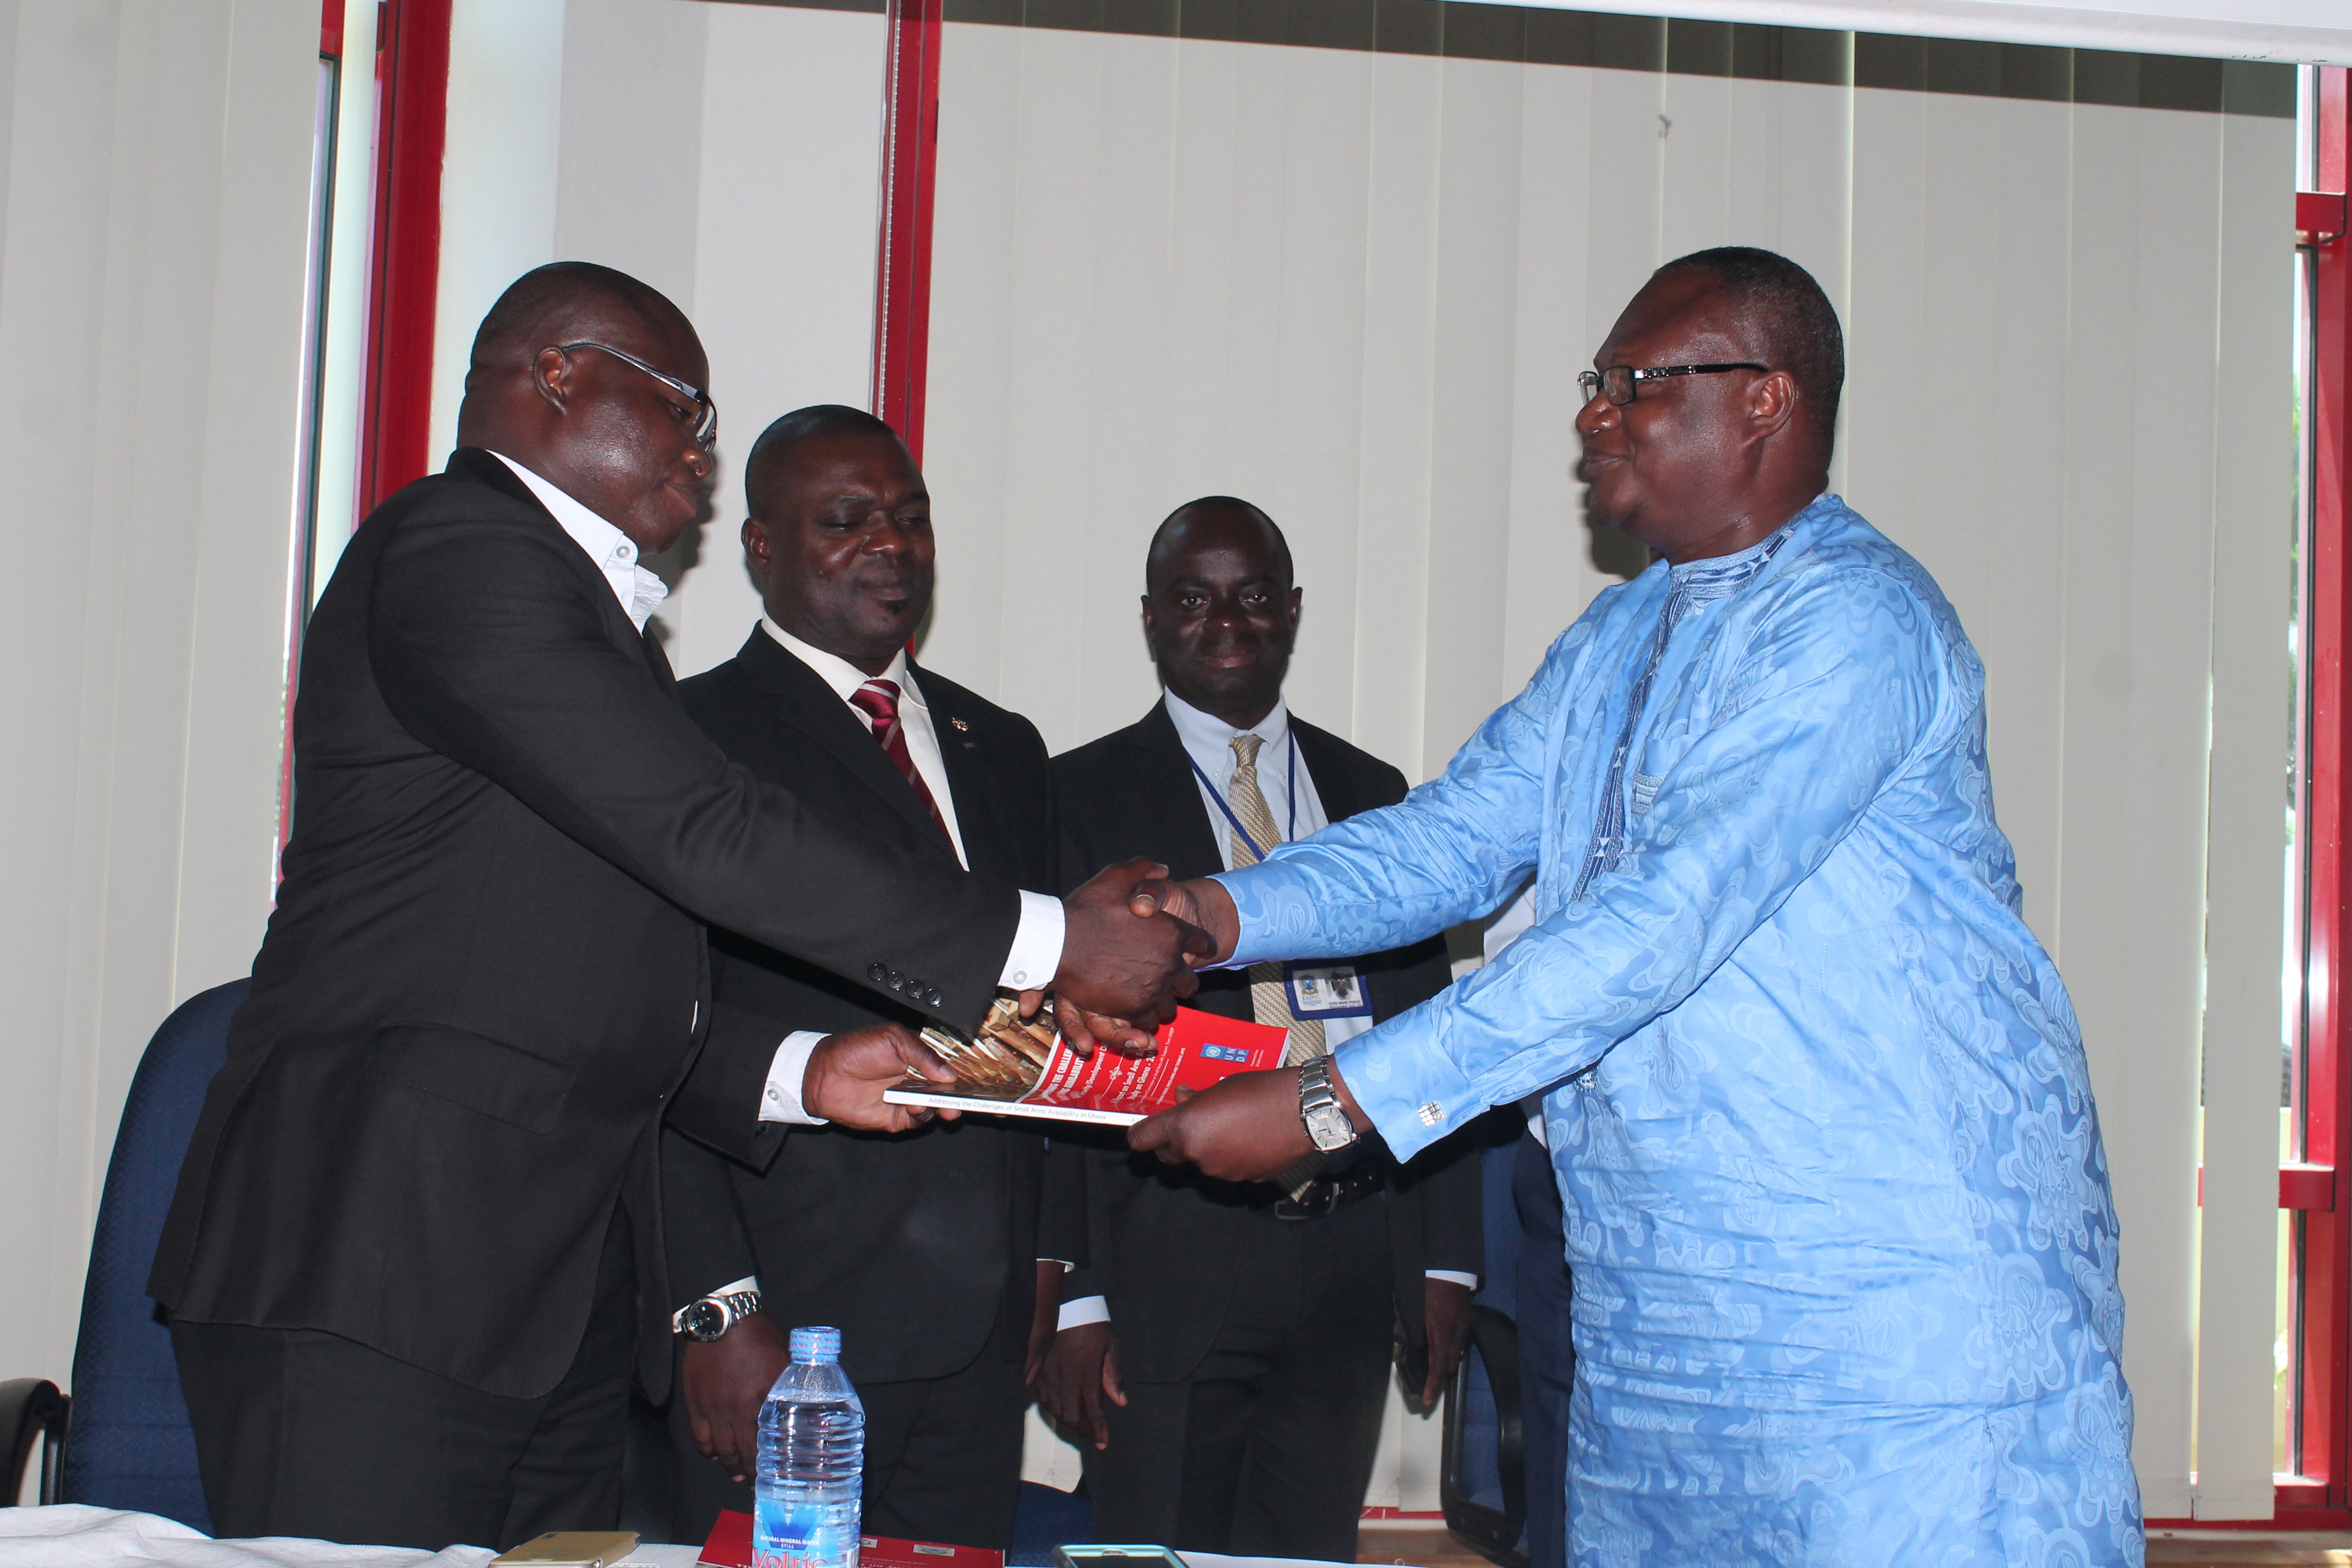 Mr Prosper Bani (right), the Minister of the Interior, presenting the report to Mr Louis Kuukpen (left), Assistant Country Director, UNDP. Looking on are Mr Jones Bortey Applerh, Executive Secretary of the Commission on Small Arms and Mr John Pokoo, Head of Conflict Management Programme